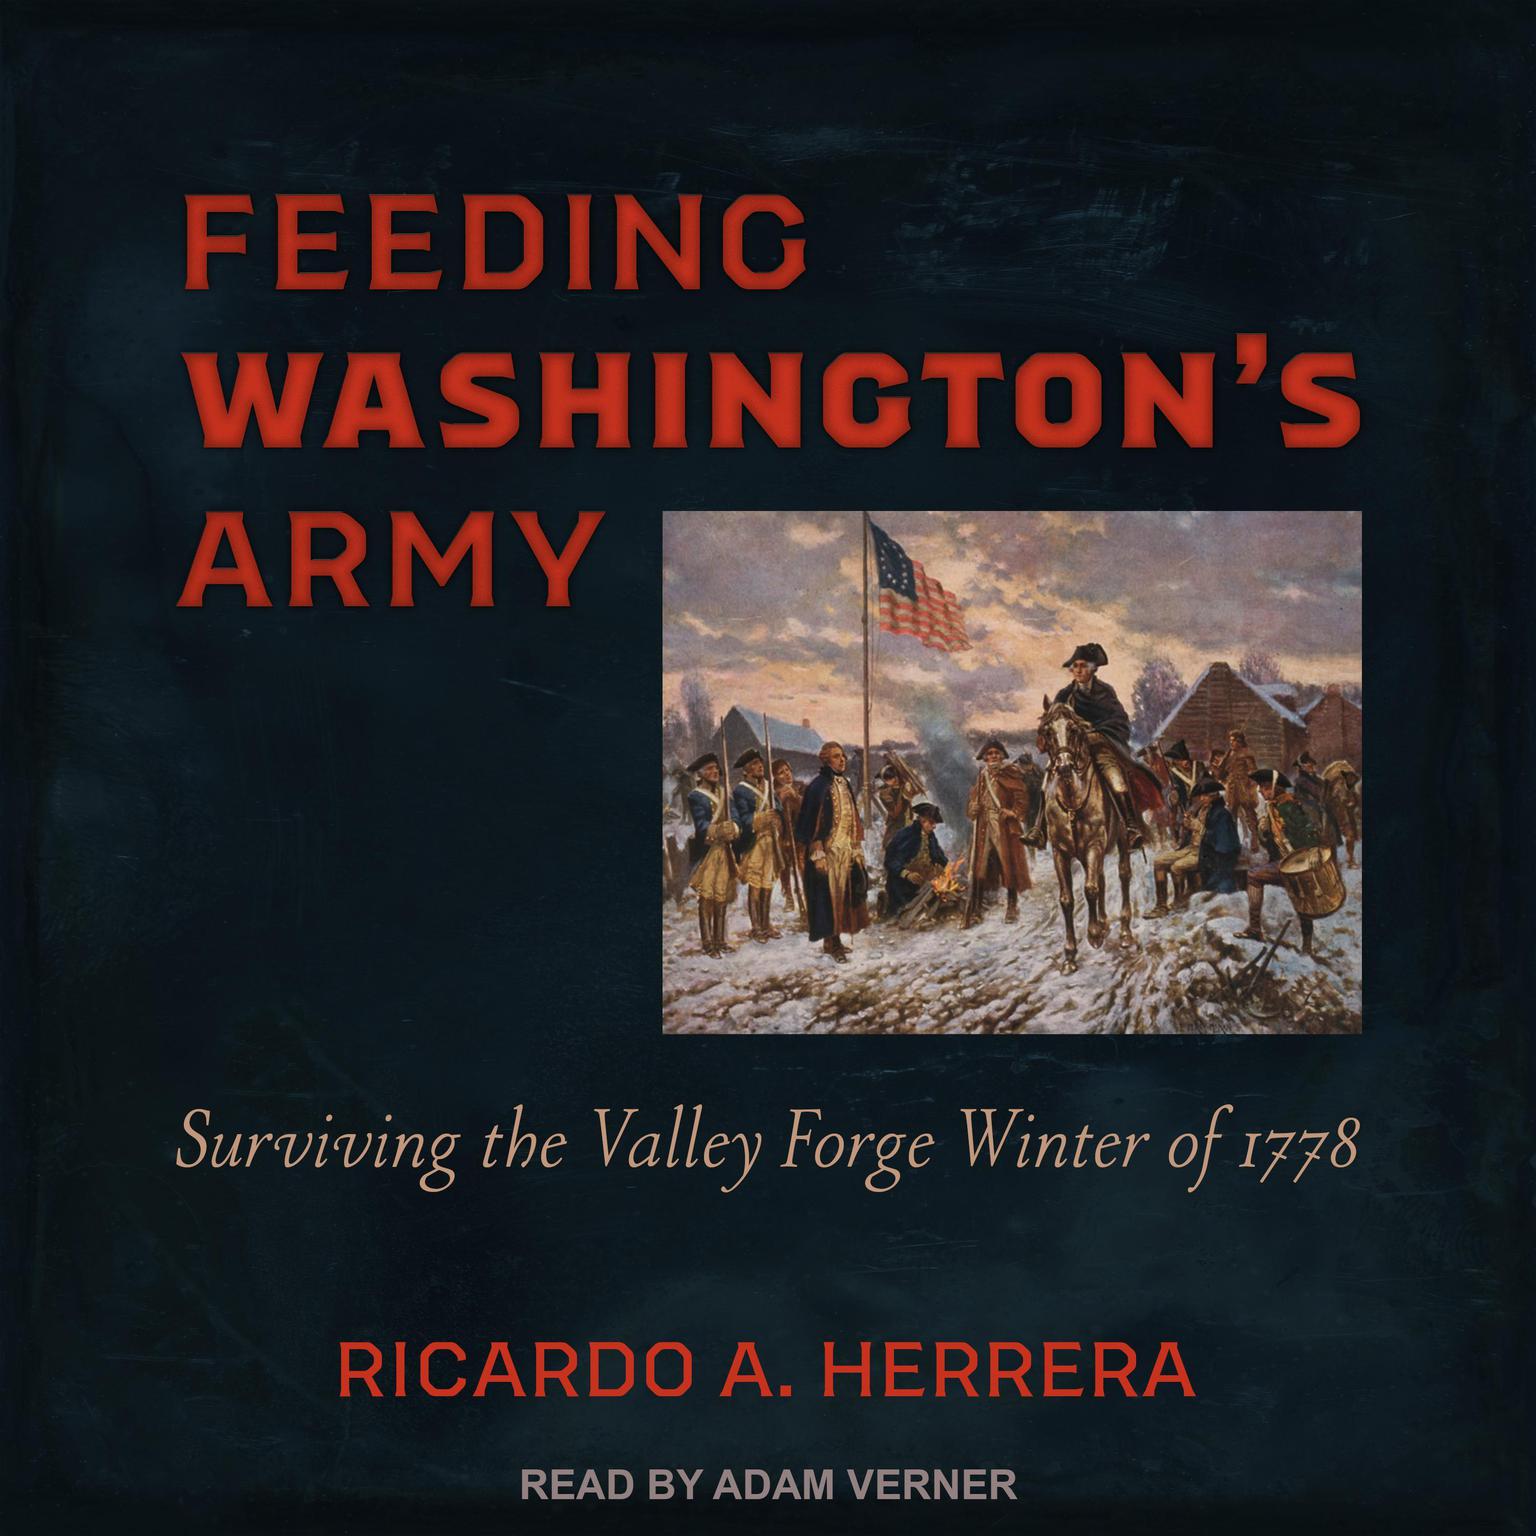 Feeding Washingtons Army: Surviving the Valley Forge Winter of 1778 Audiobook, by Ricardo A. Herrera